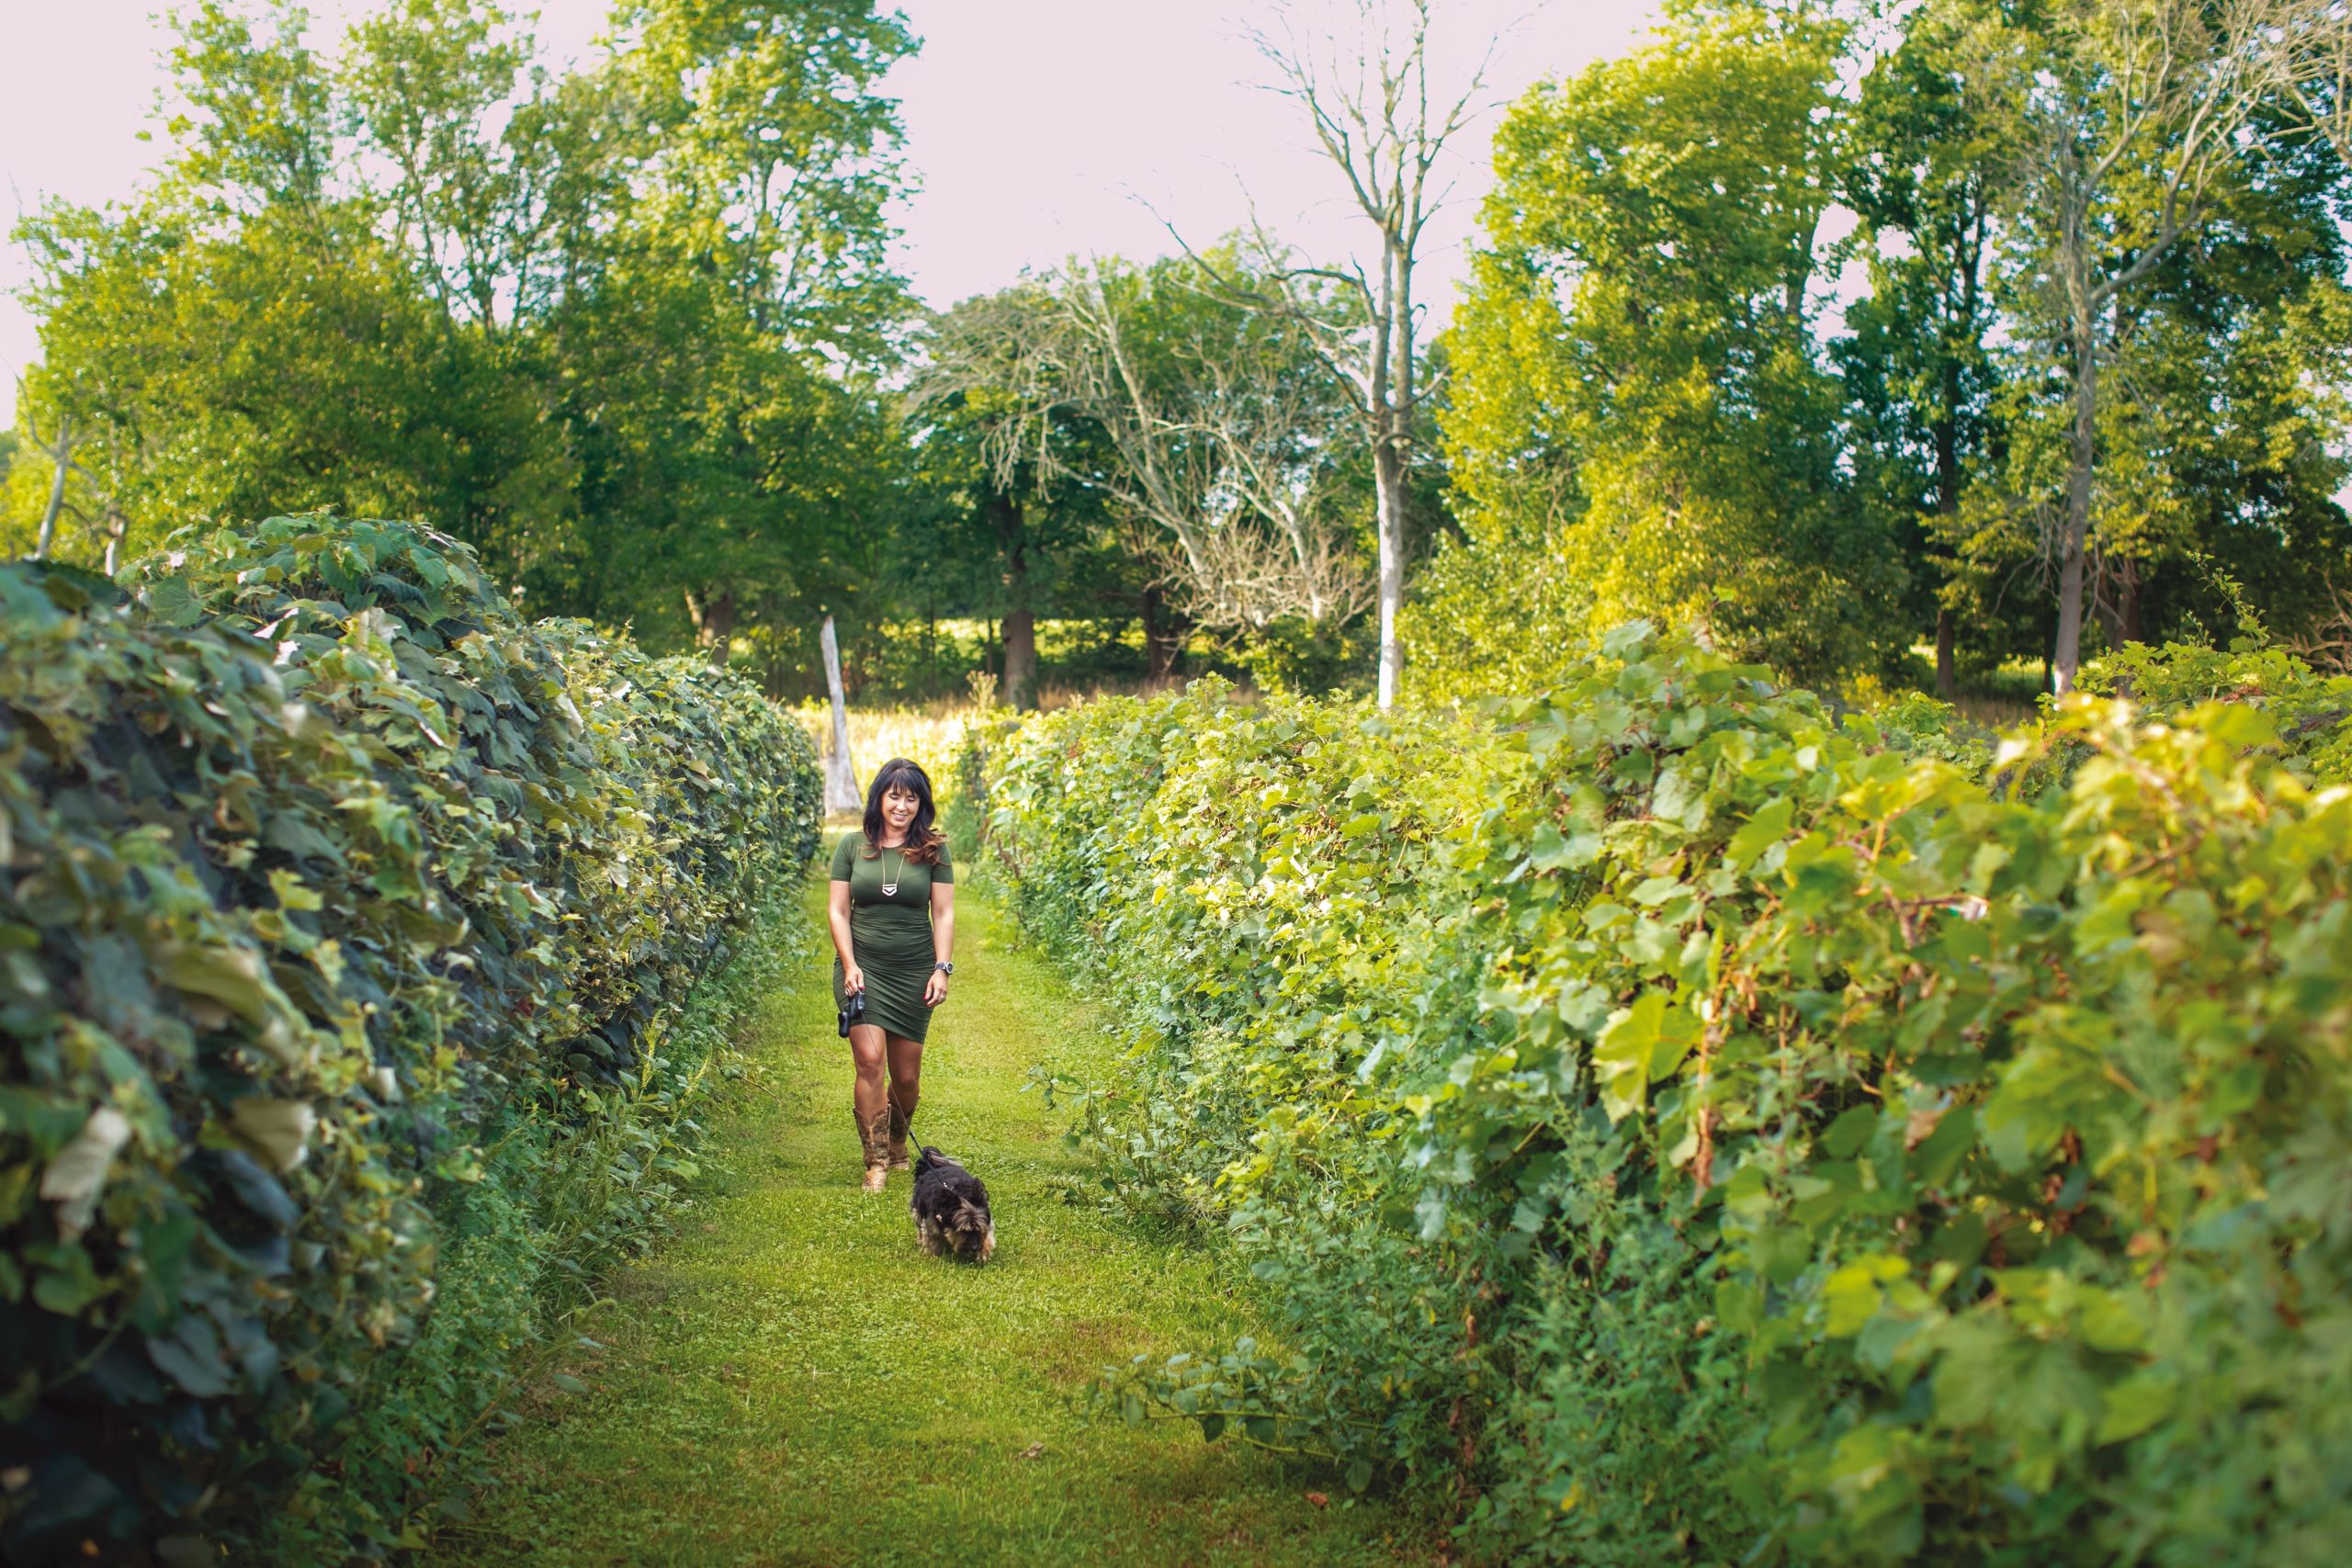 A woman walking through the vineyard of Belgian Horse Winery in Middletown, Indiana